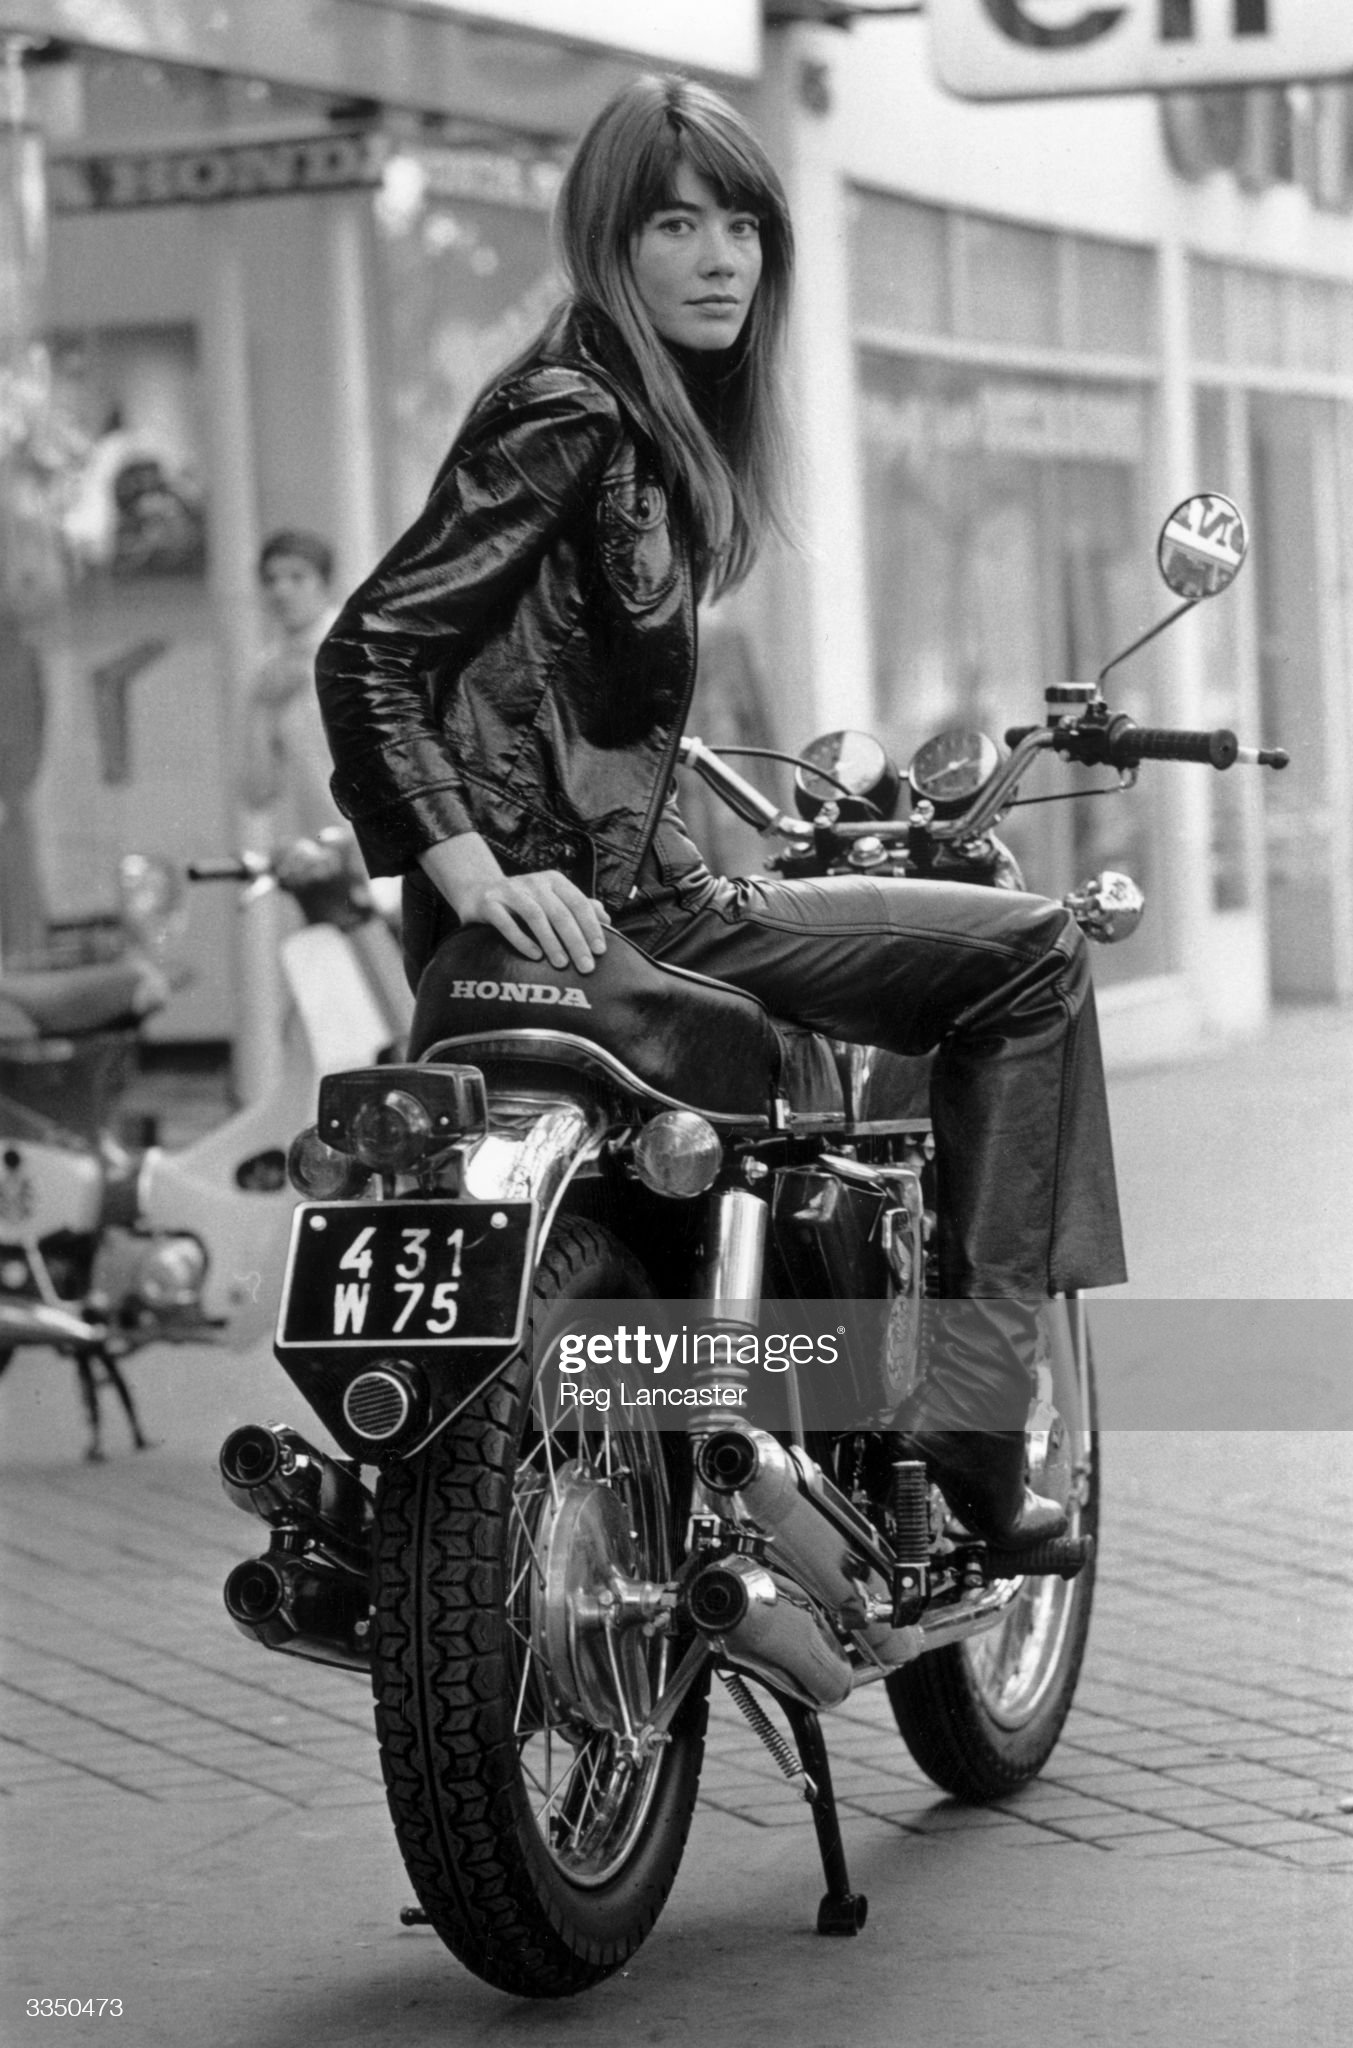 Françoise Hardy sitting on a Honda CB 750 motorcycle in Paris on 25th October 1969. 